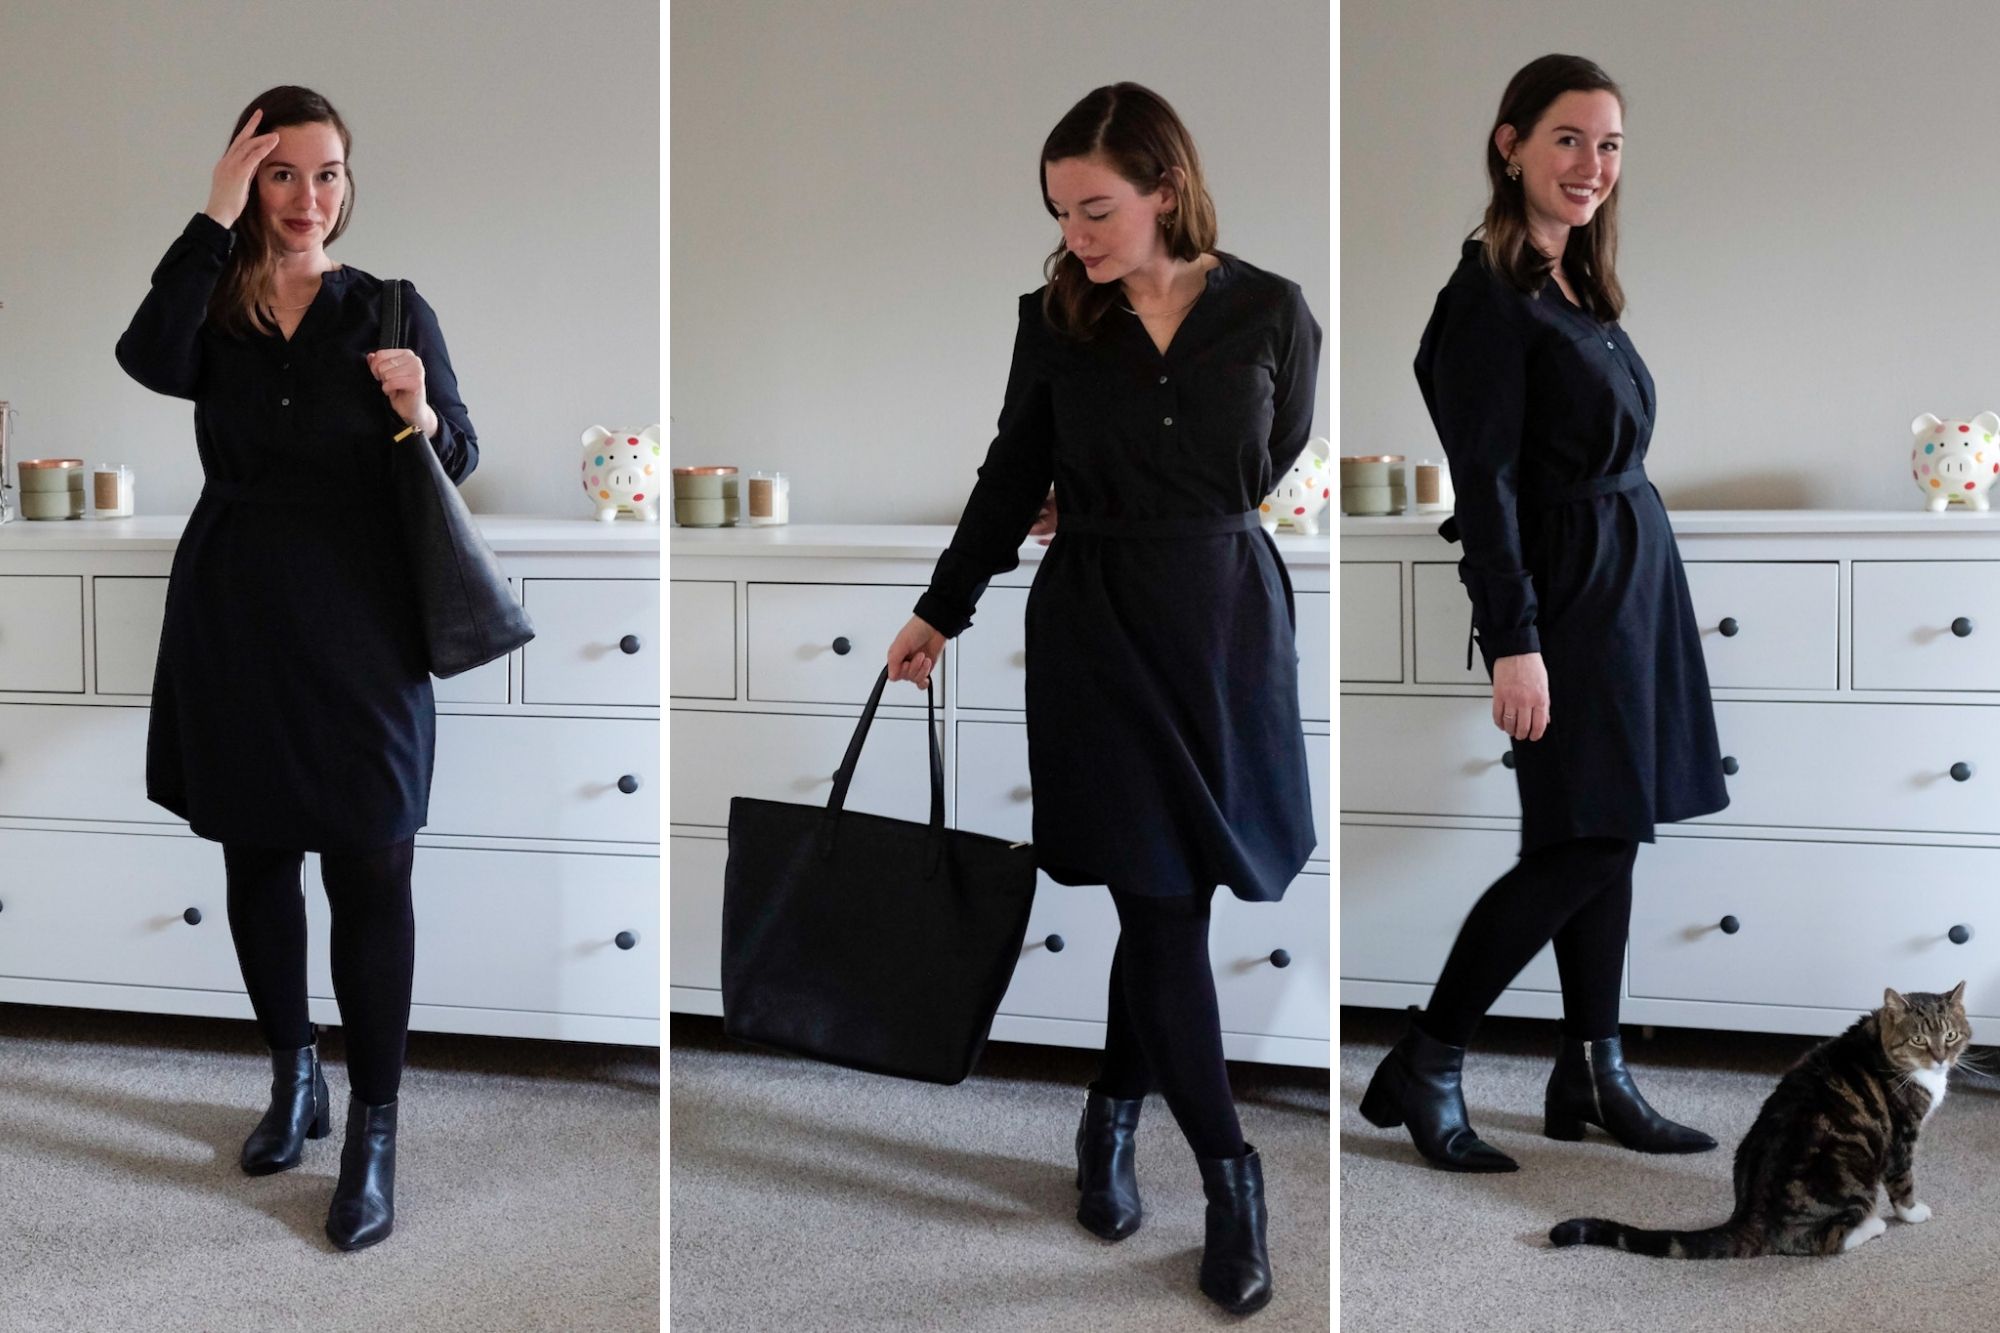 Alyssa wears the Clara dress with black tights and a black tote bag. Her cat Meow is in the shot